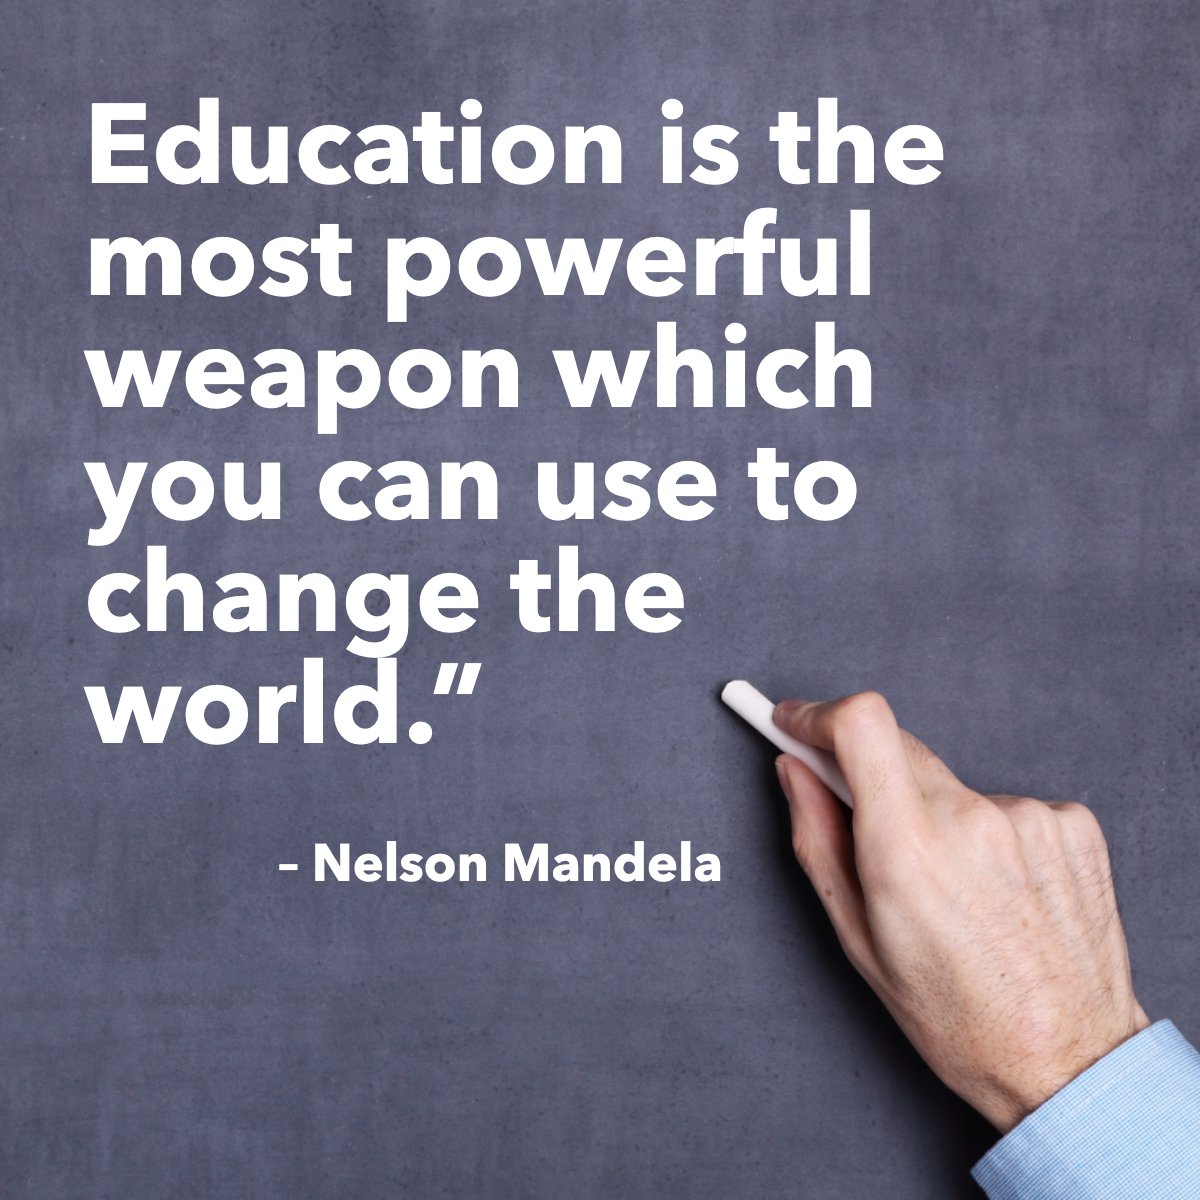 'Education is the most powerful weapon which you can use to change the world' 
— Nelson Mandela  📖

#educationquotes    #wisdomquote    #wisdomoftheday    #quotegram    #quoteoftheday    #nelsonmandela    #educationispower